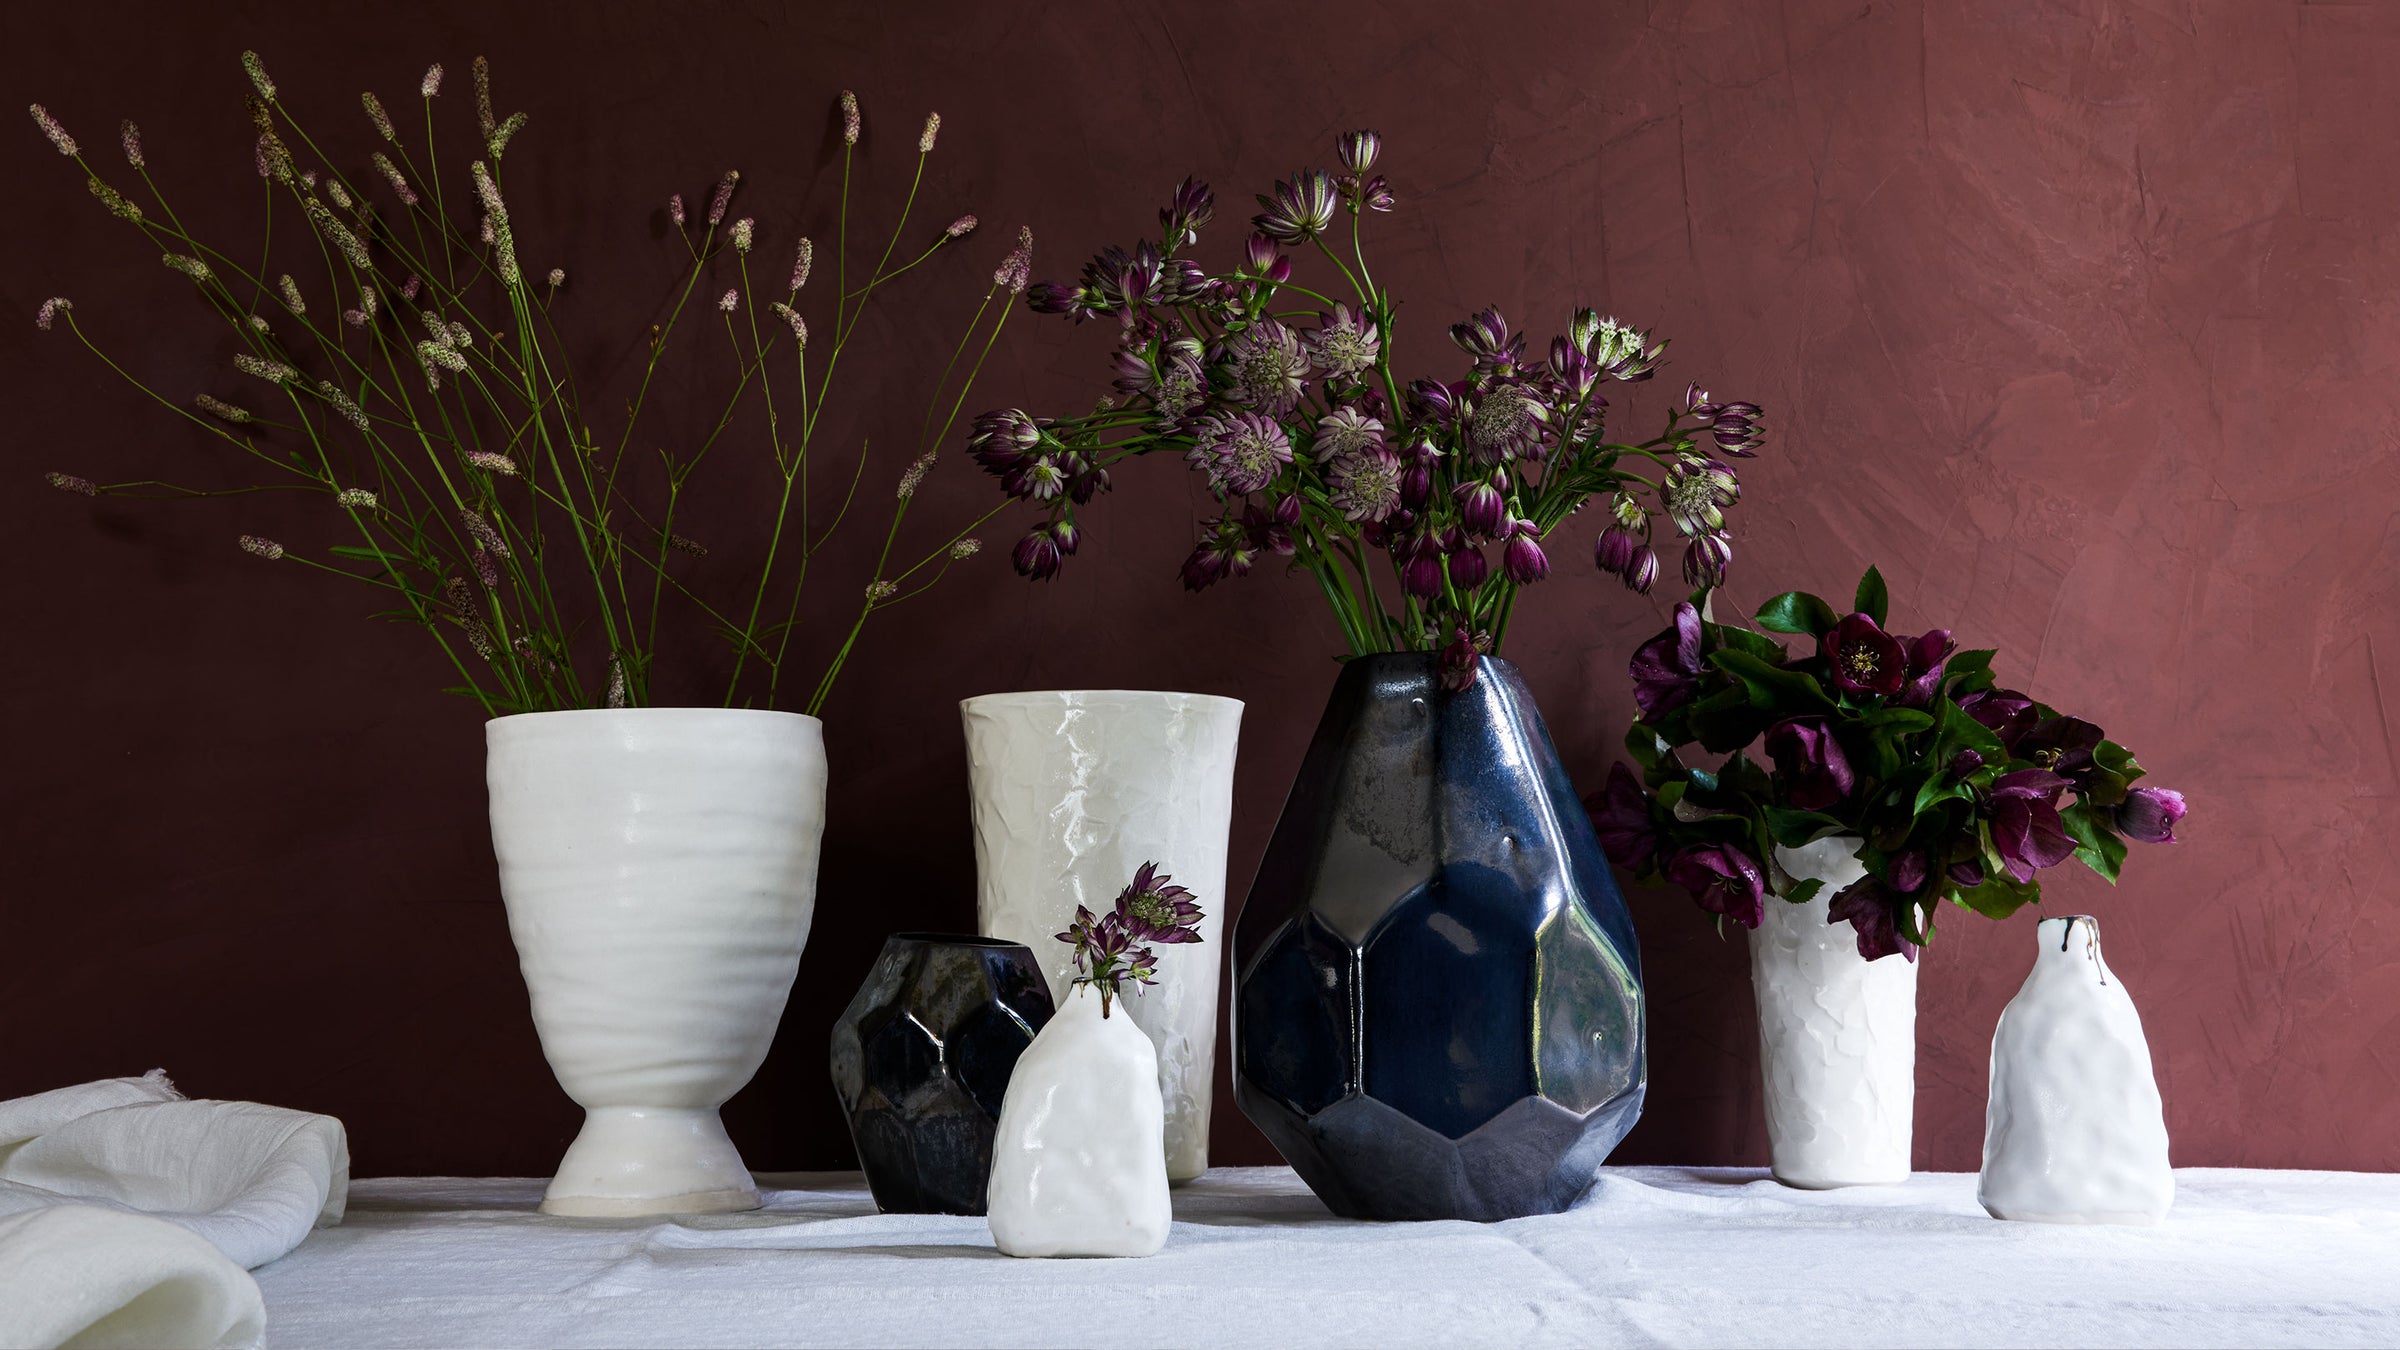 DBO HOME artisan luxury ceramic vases in white and black glaze with winter plants and flowers